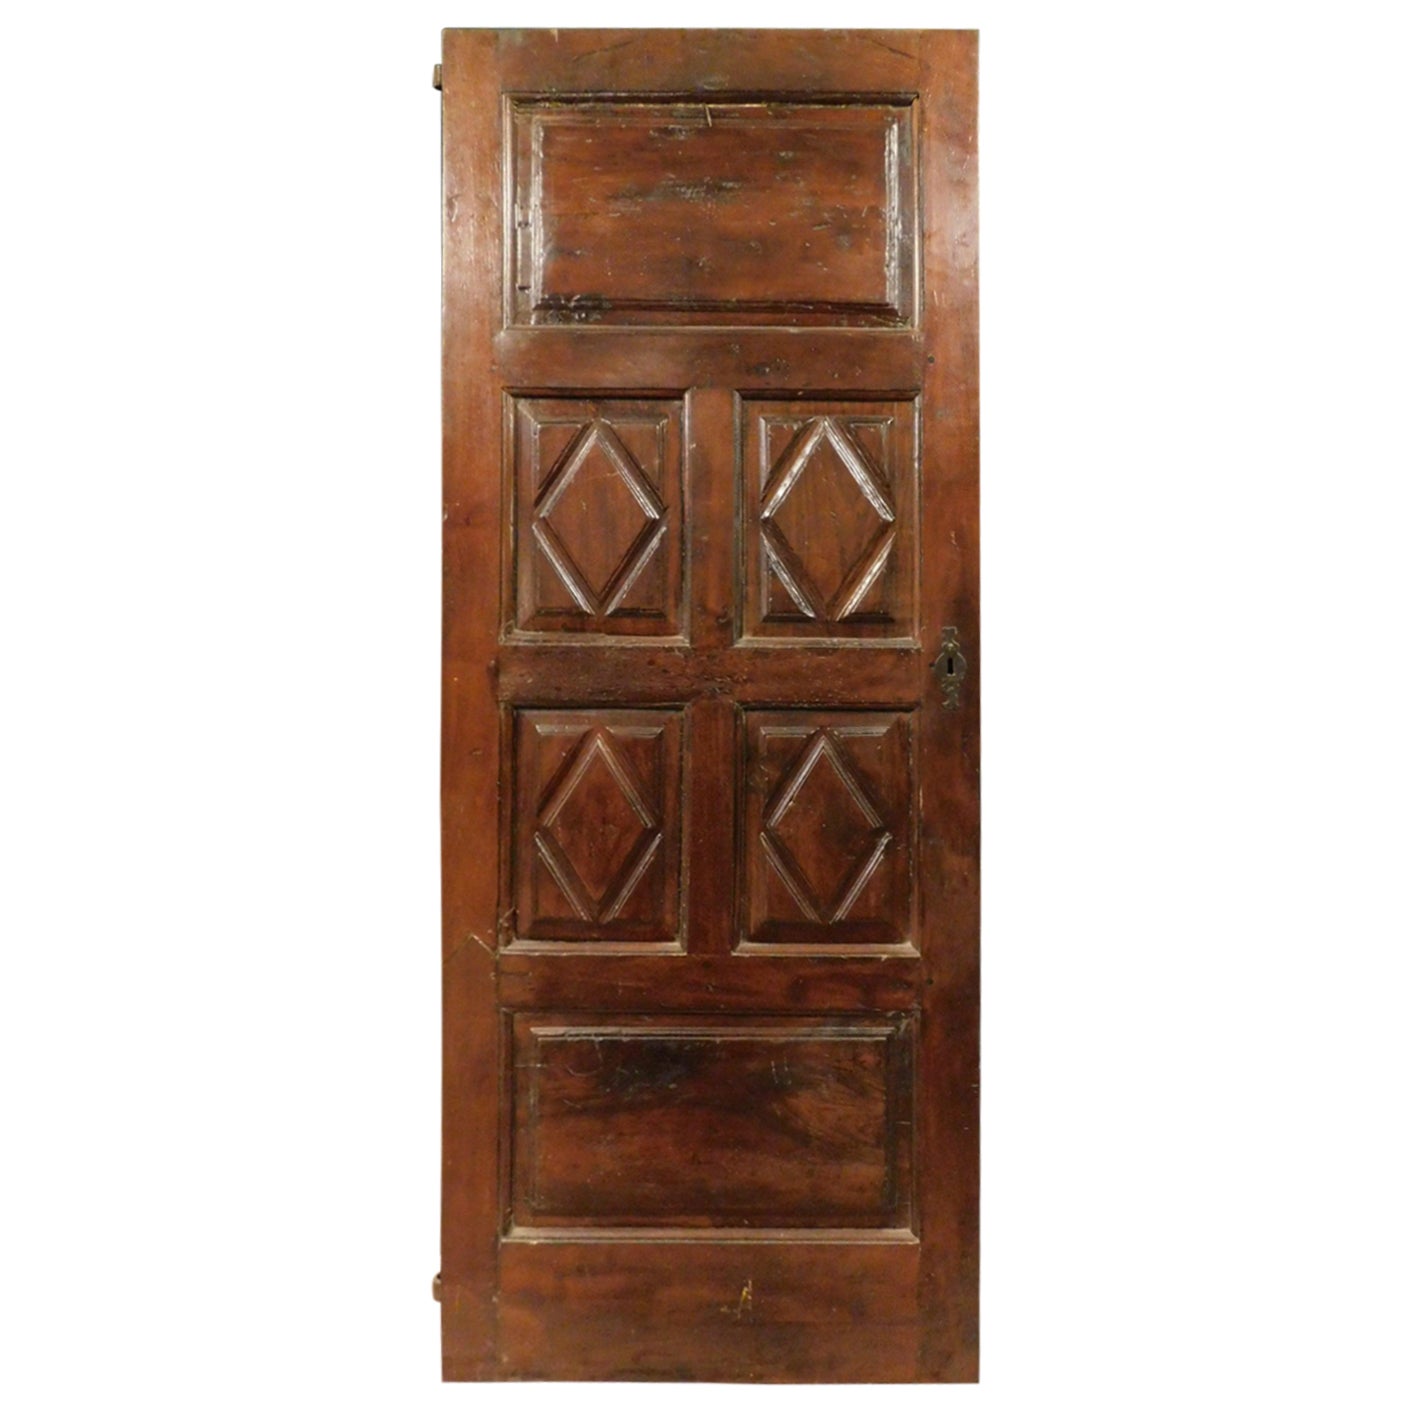 Antique Internal Door in Walnut with Six Hand-Carved Panels, 18th Century Italy